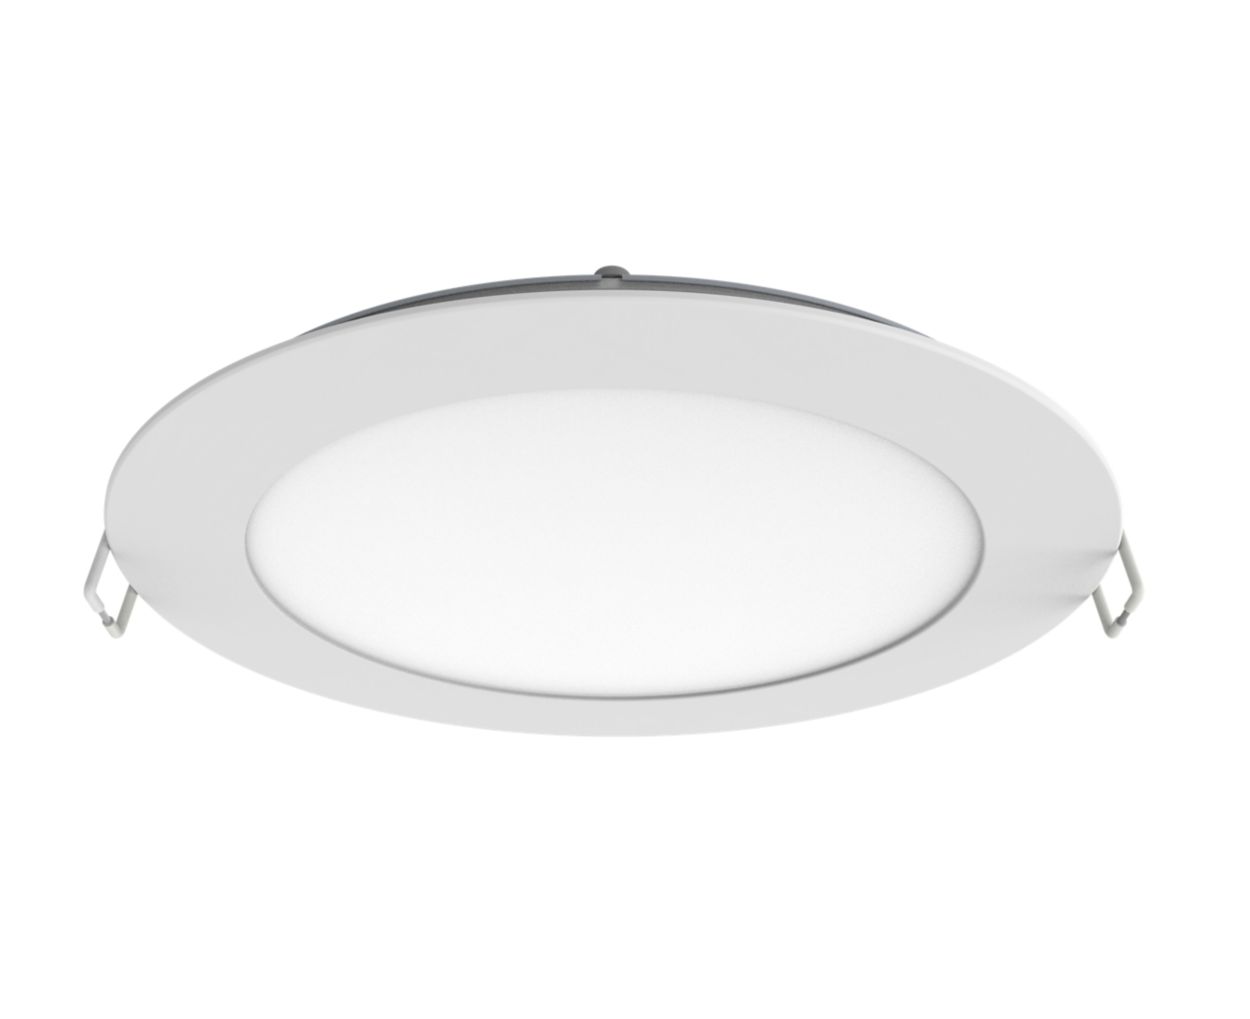 High quality LED light designed to last for years